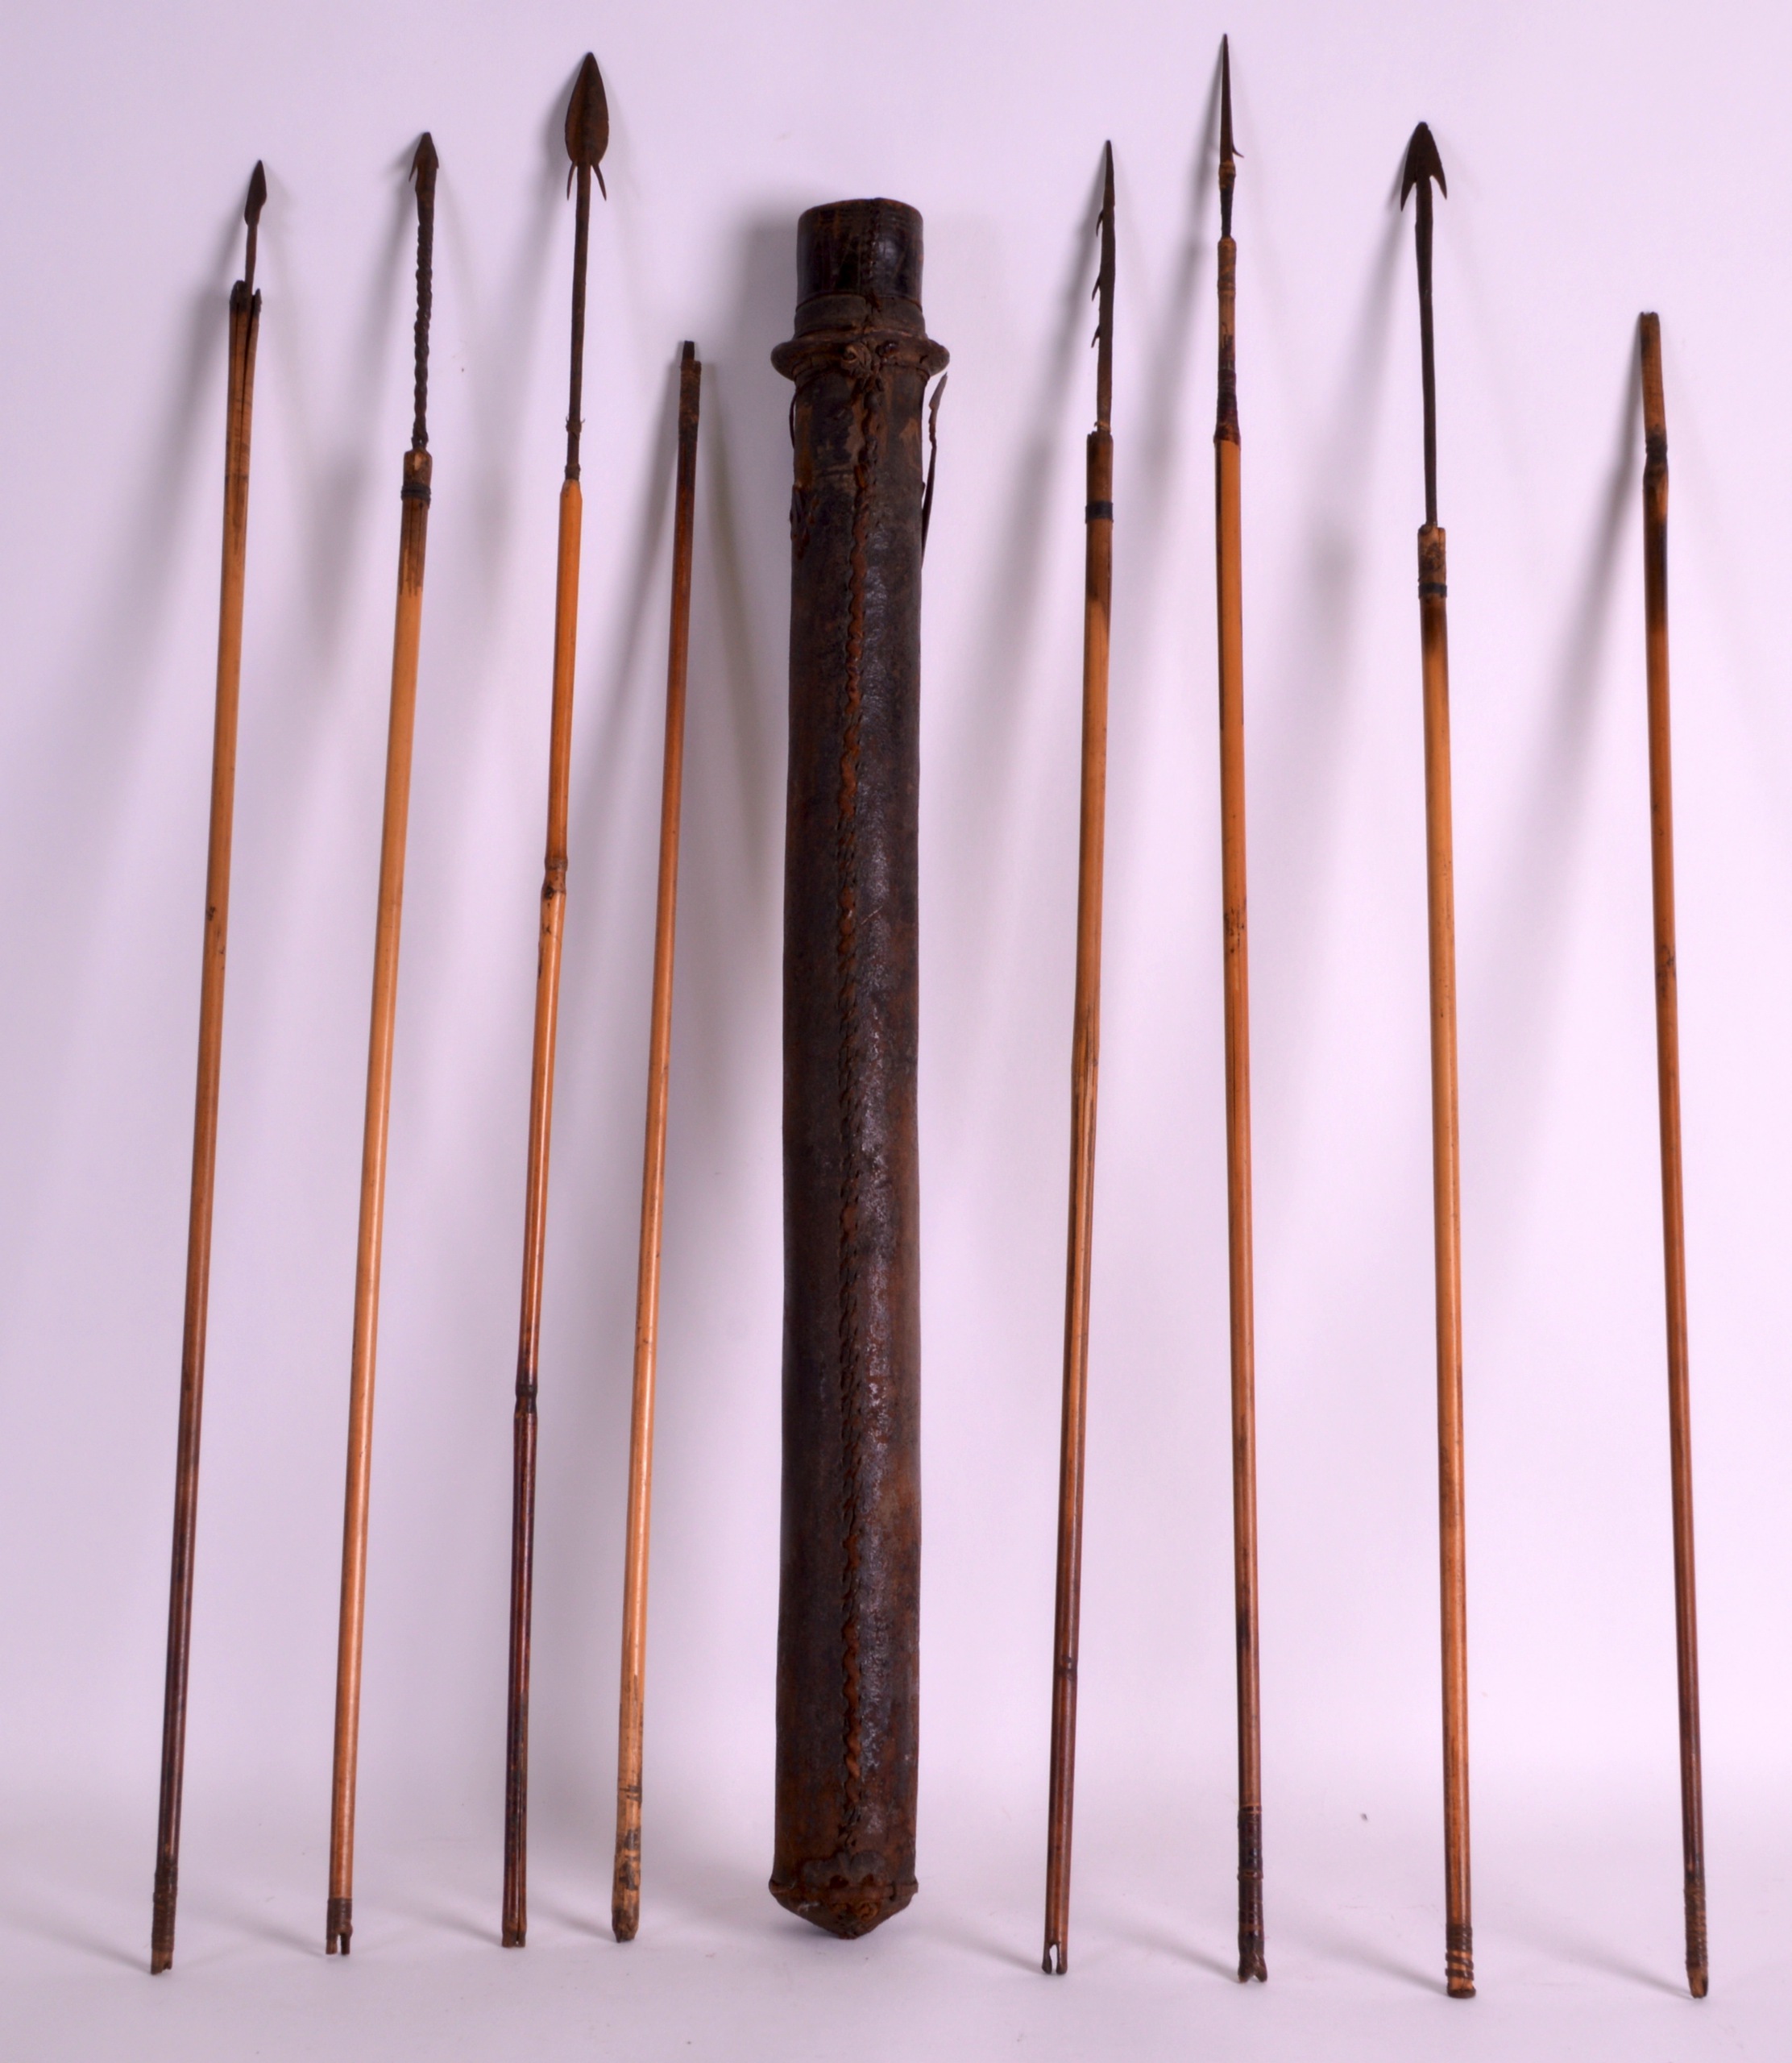 AN UNUSUAL 19TH CENTURY TRIBAL QUIVER CASE containing numerous steel and iron tipped arrows. Case